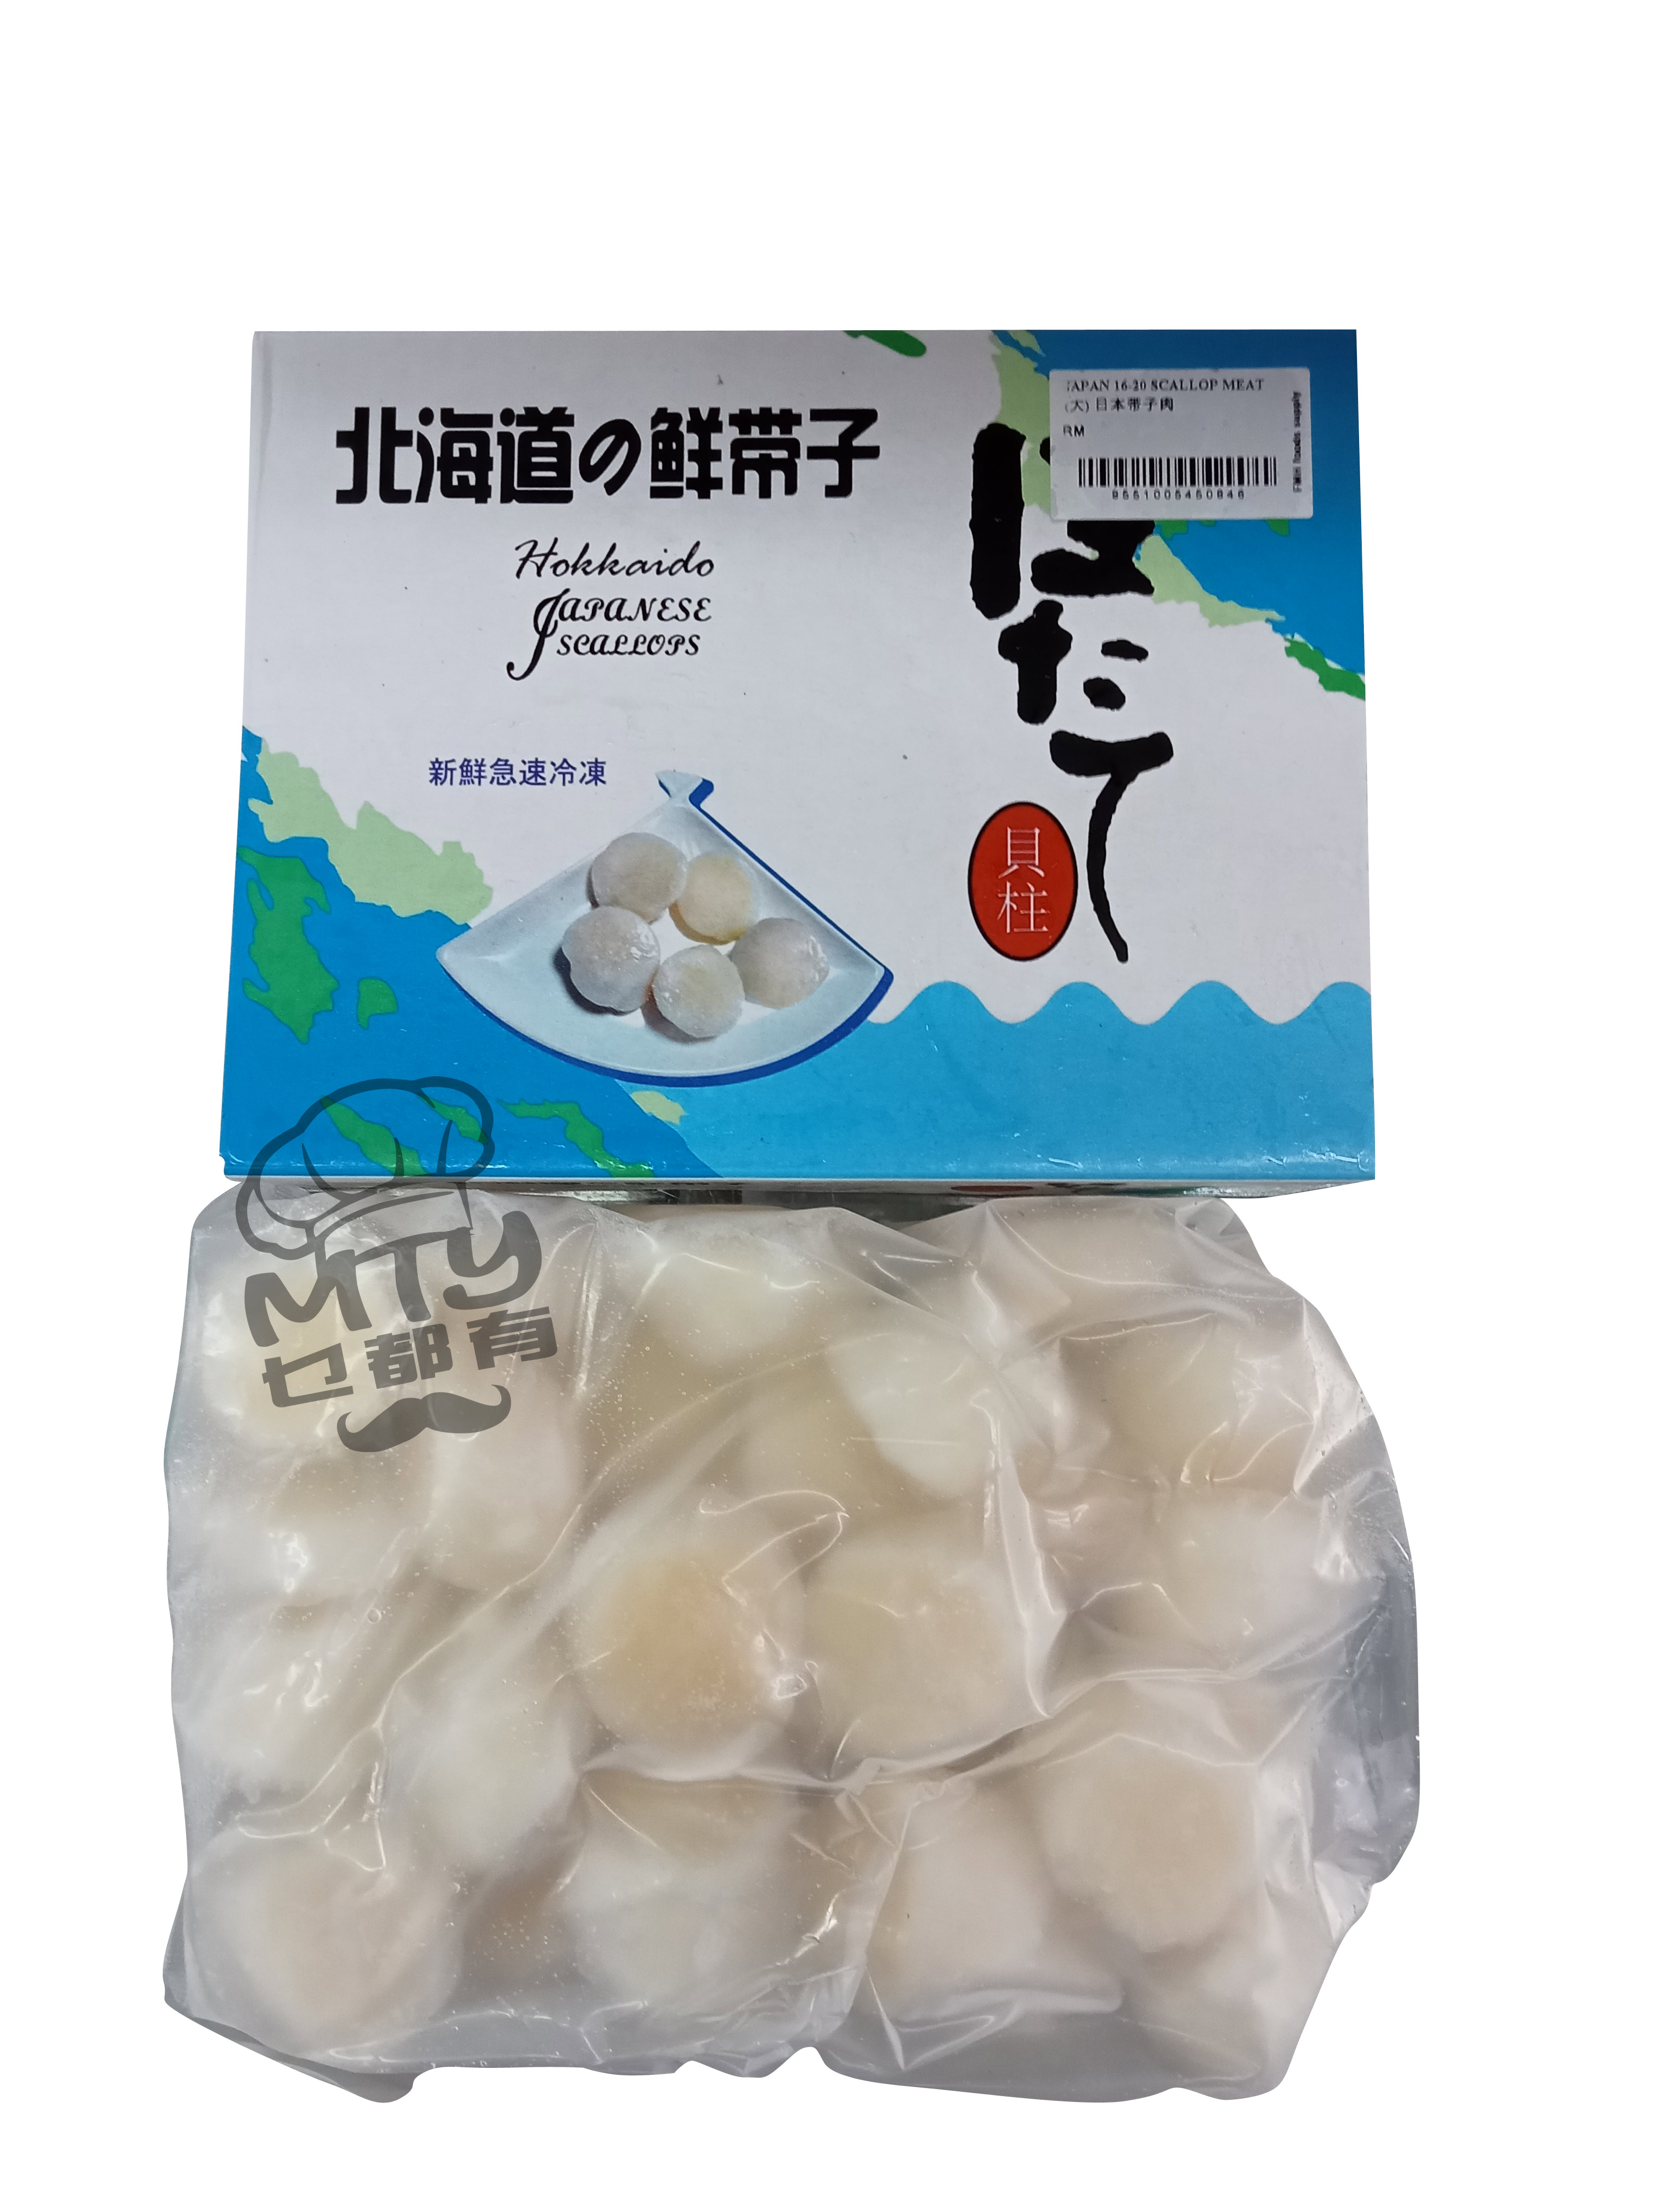 Japan 16-20 Scallop Meat